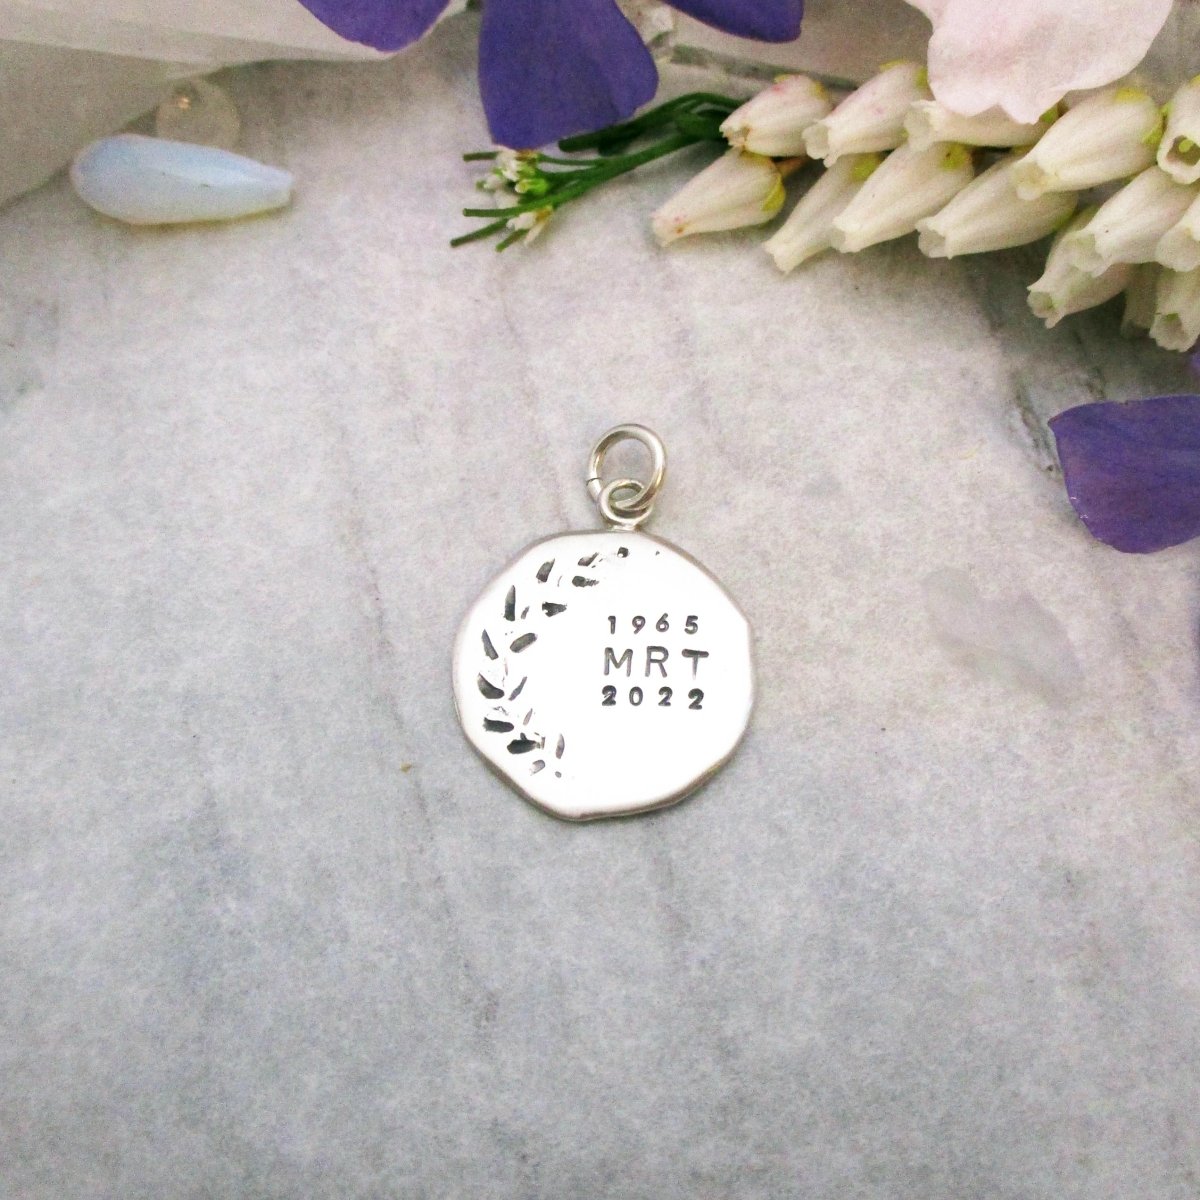 Personalized Engraved Ivy Charm for Graduation or Memorial - Luxe Design Jewellery